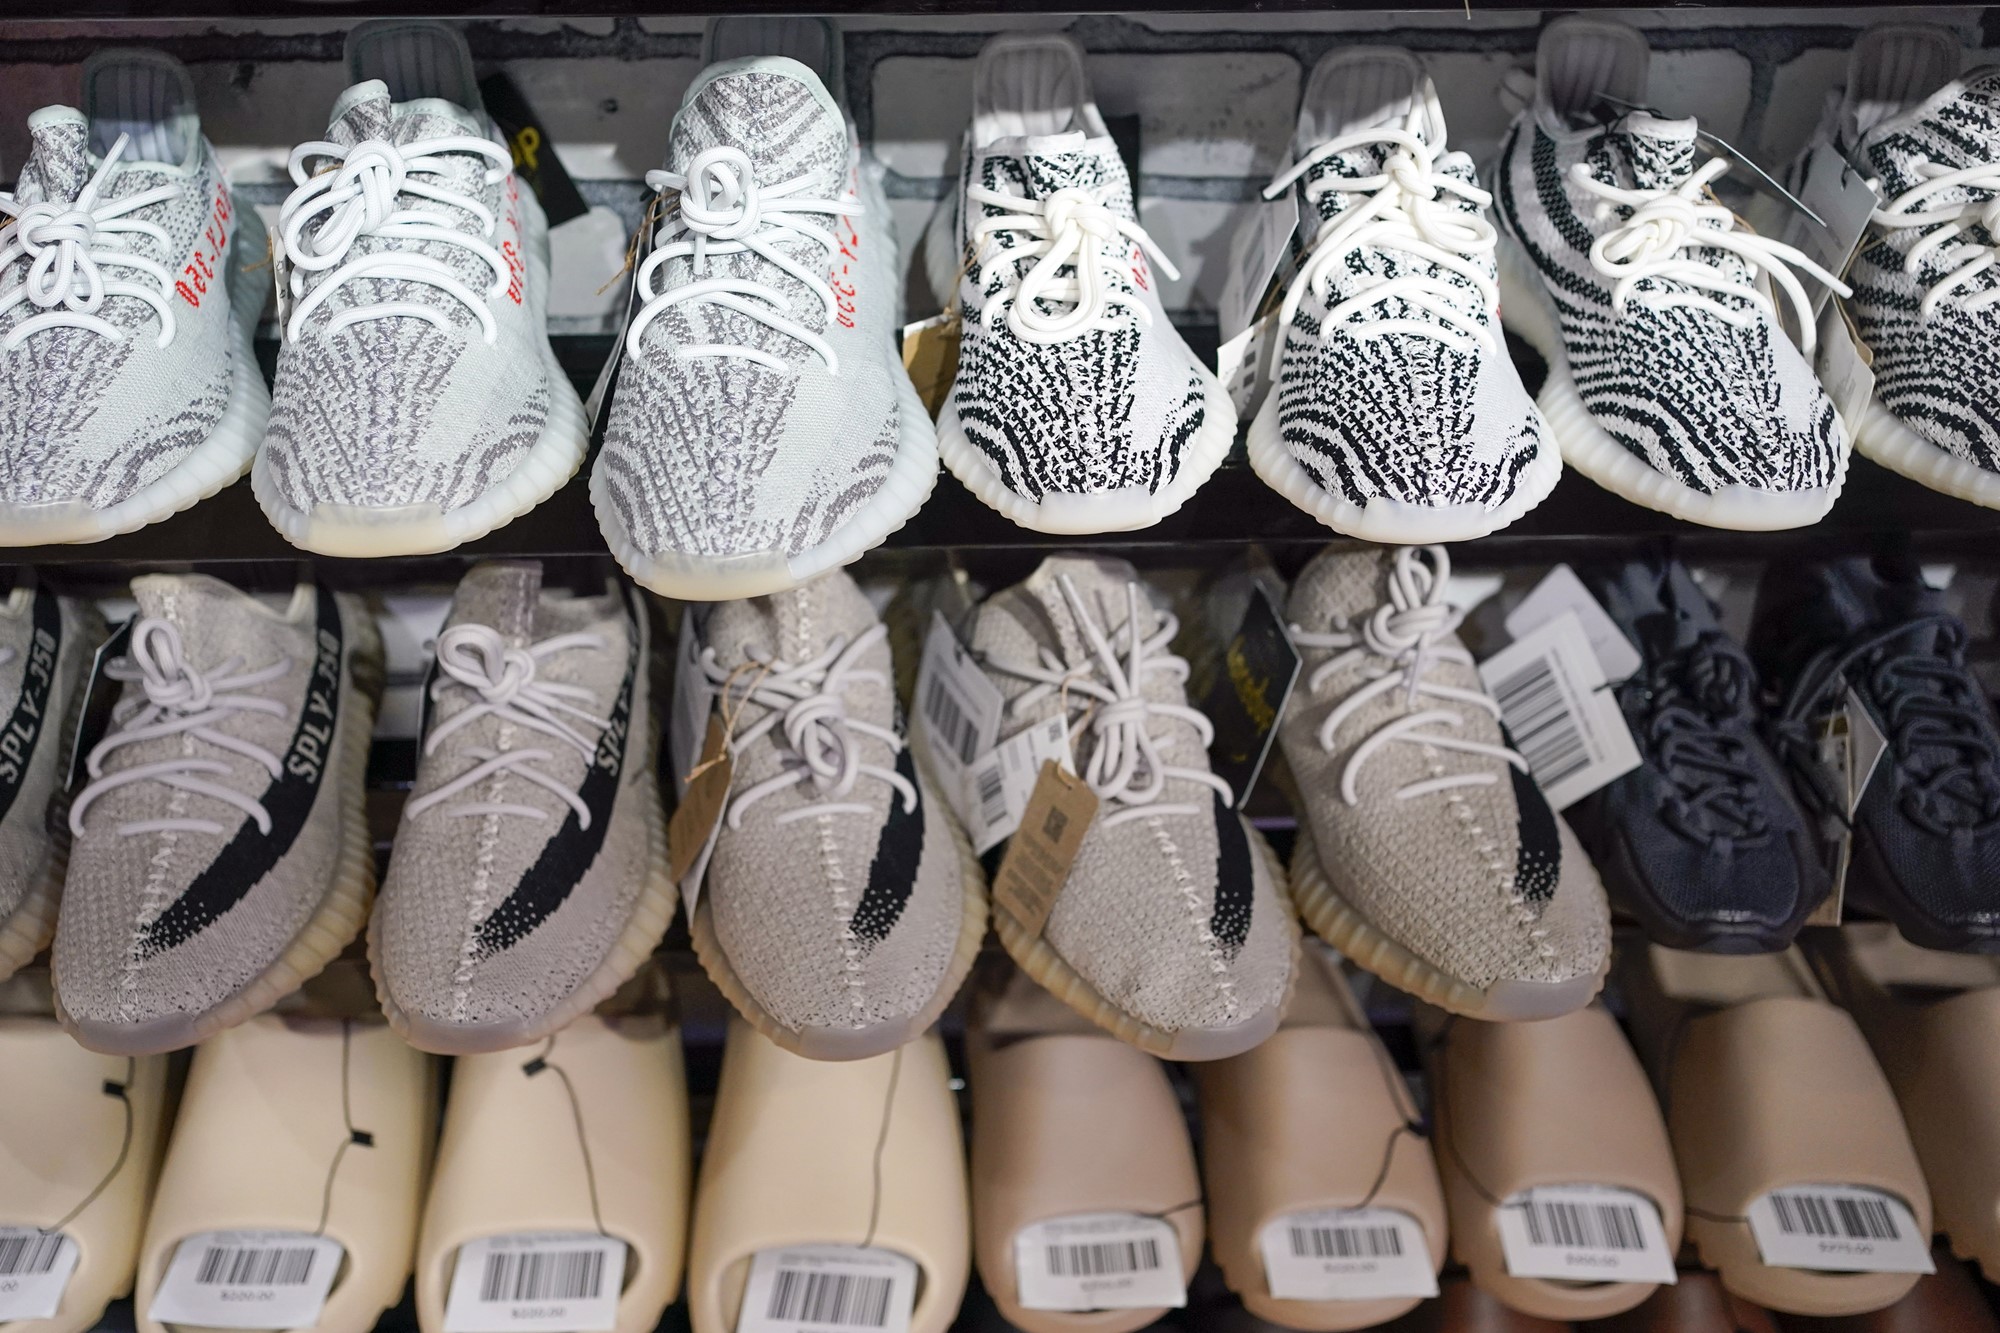 New Yeezy shoes lined up on shelves